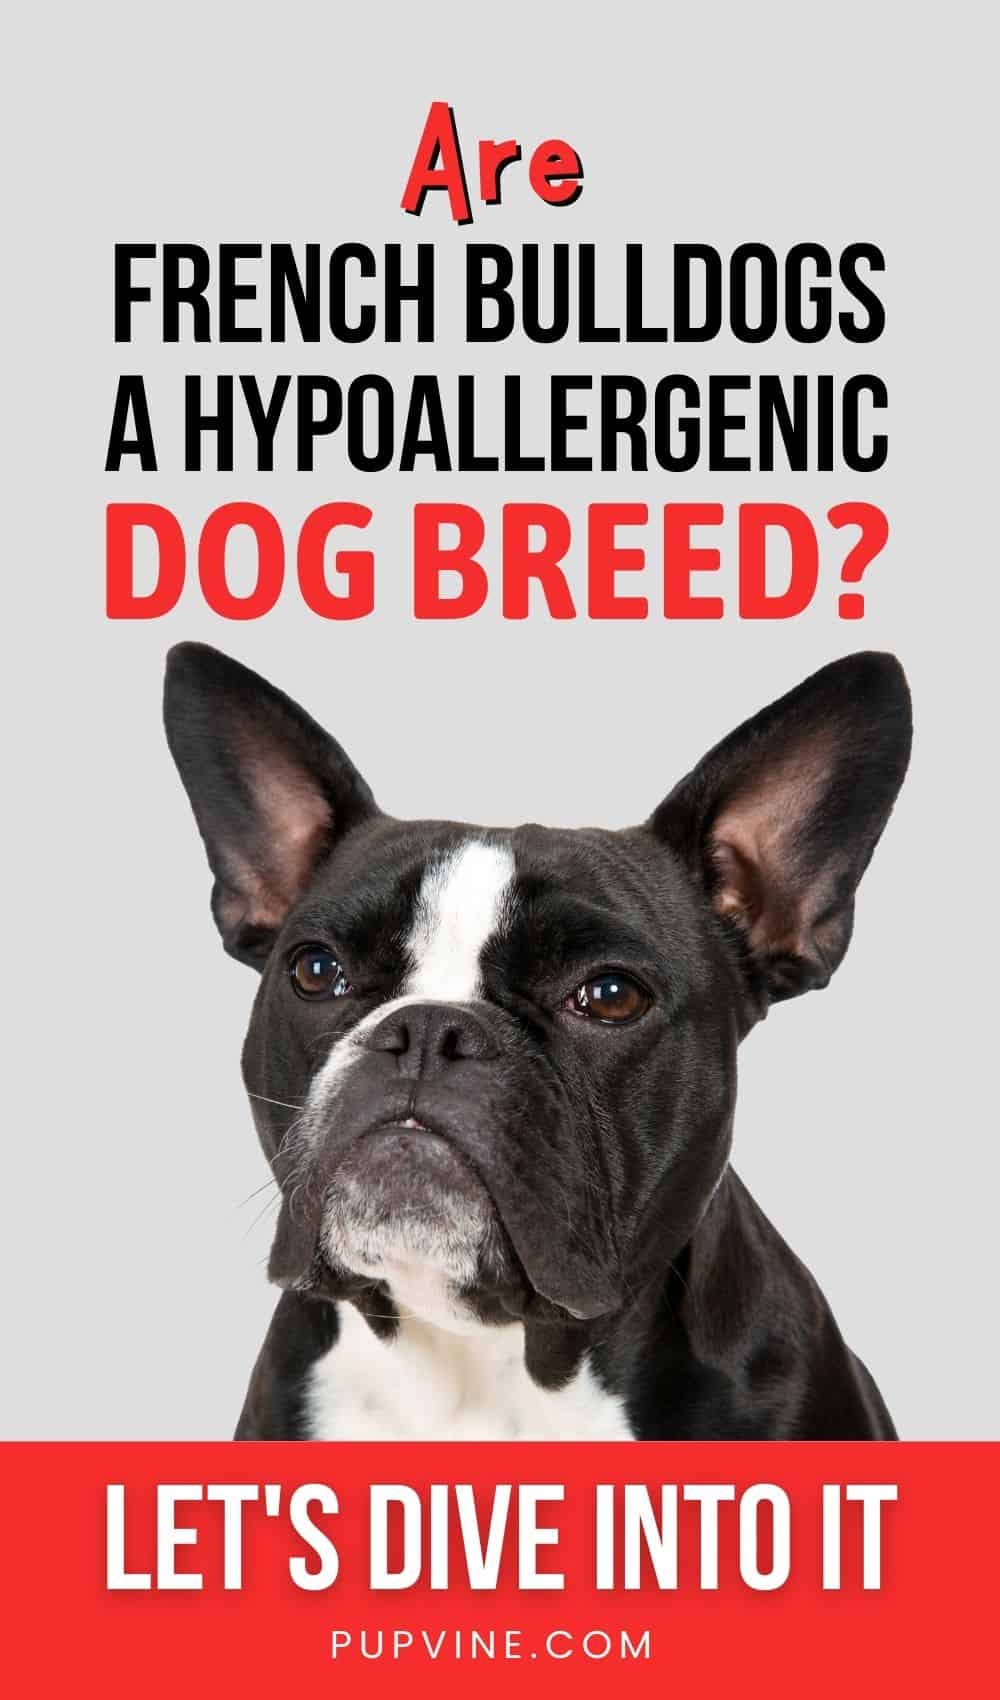 Are French Bulldogs a Hypoallergenic Dog Breed? Let's Dive Into It!